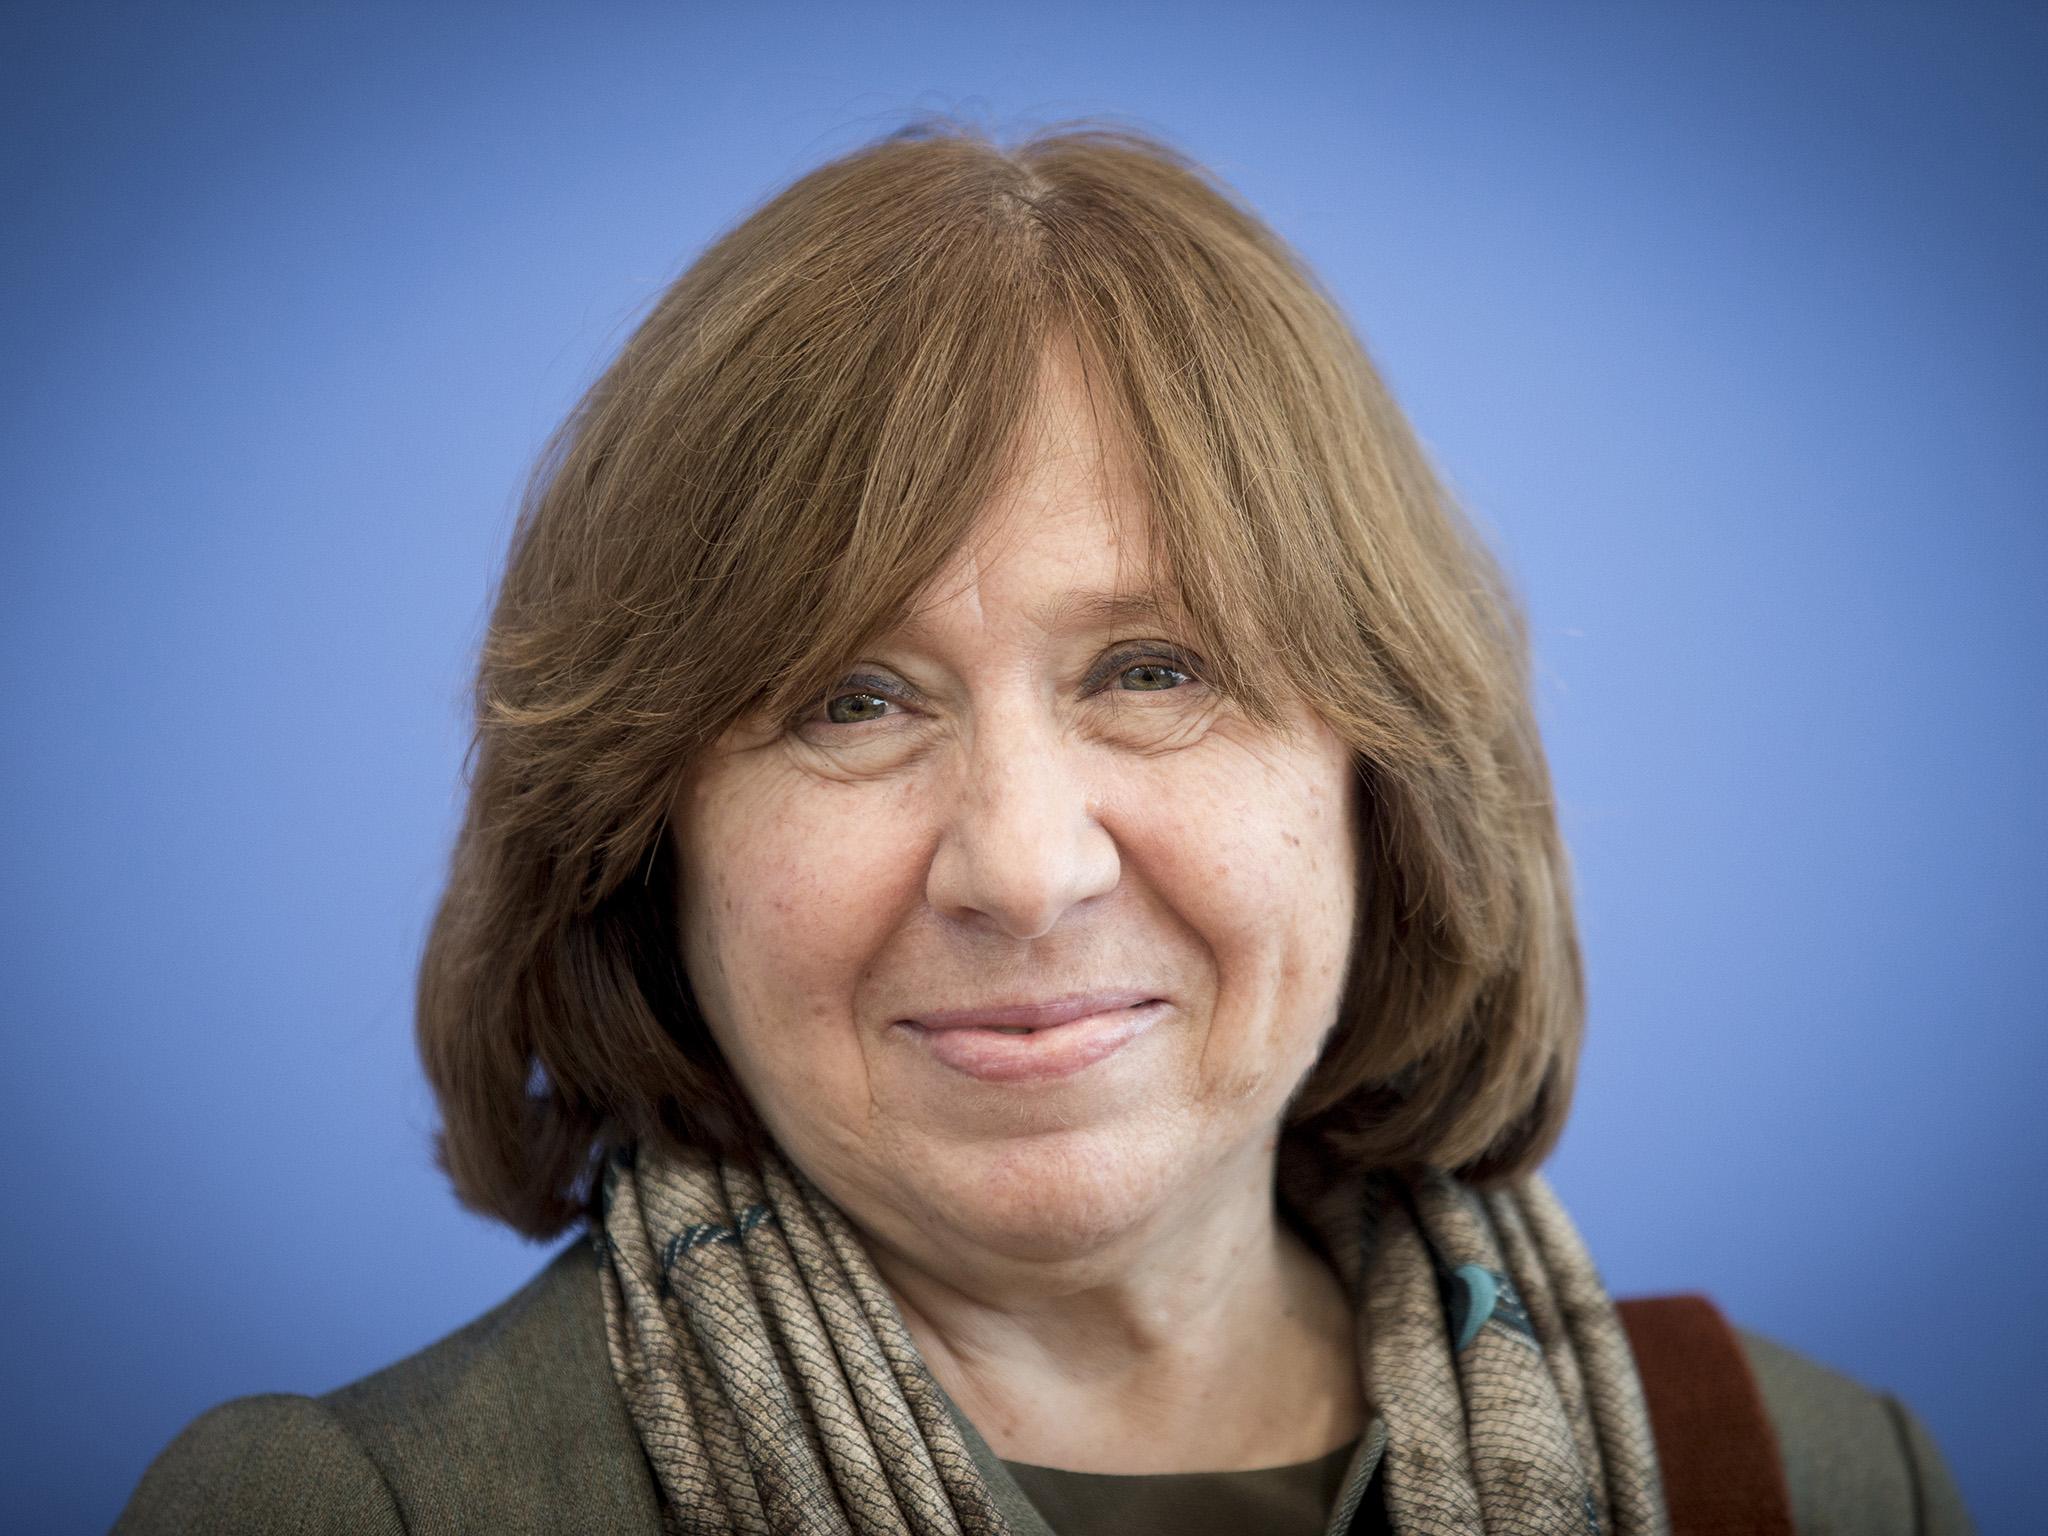 Svetlana Alexievich arrives at a press conference two days after winning the 2015 Nobel Prize